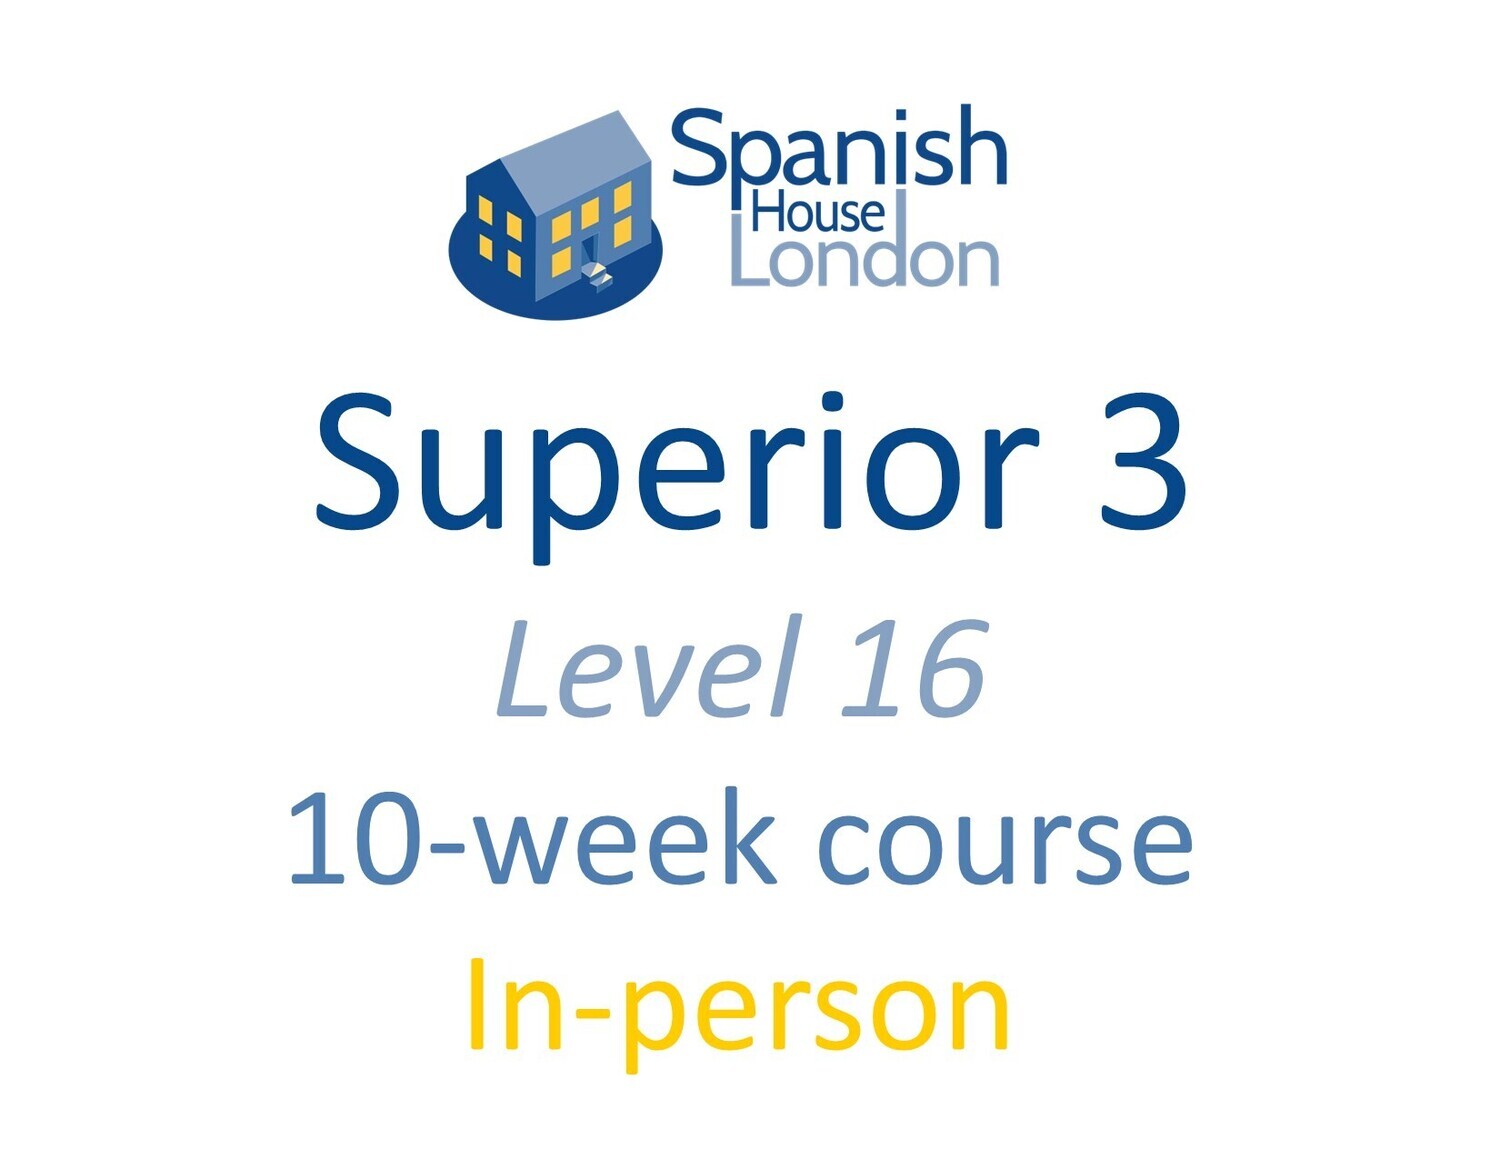 Superior 3 Course starting on 27th January at 6pm in Clapham North